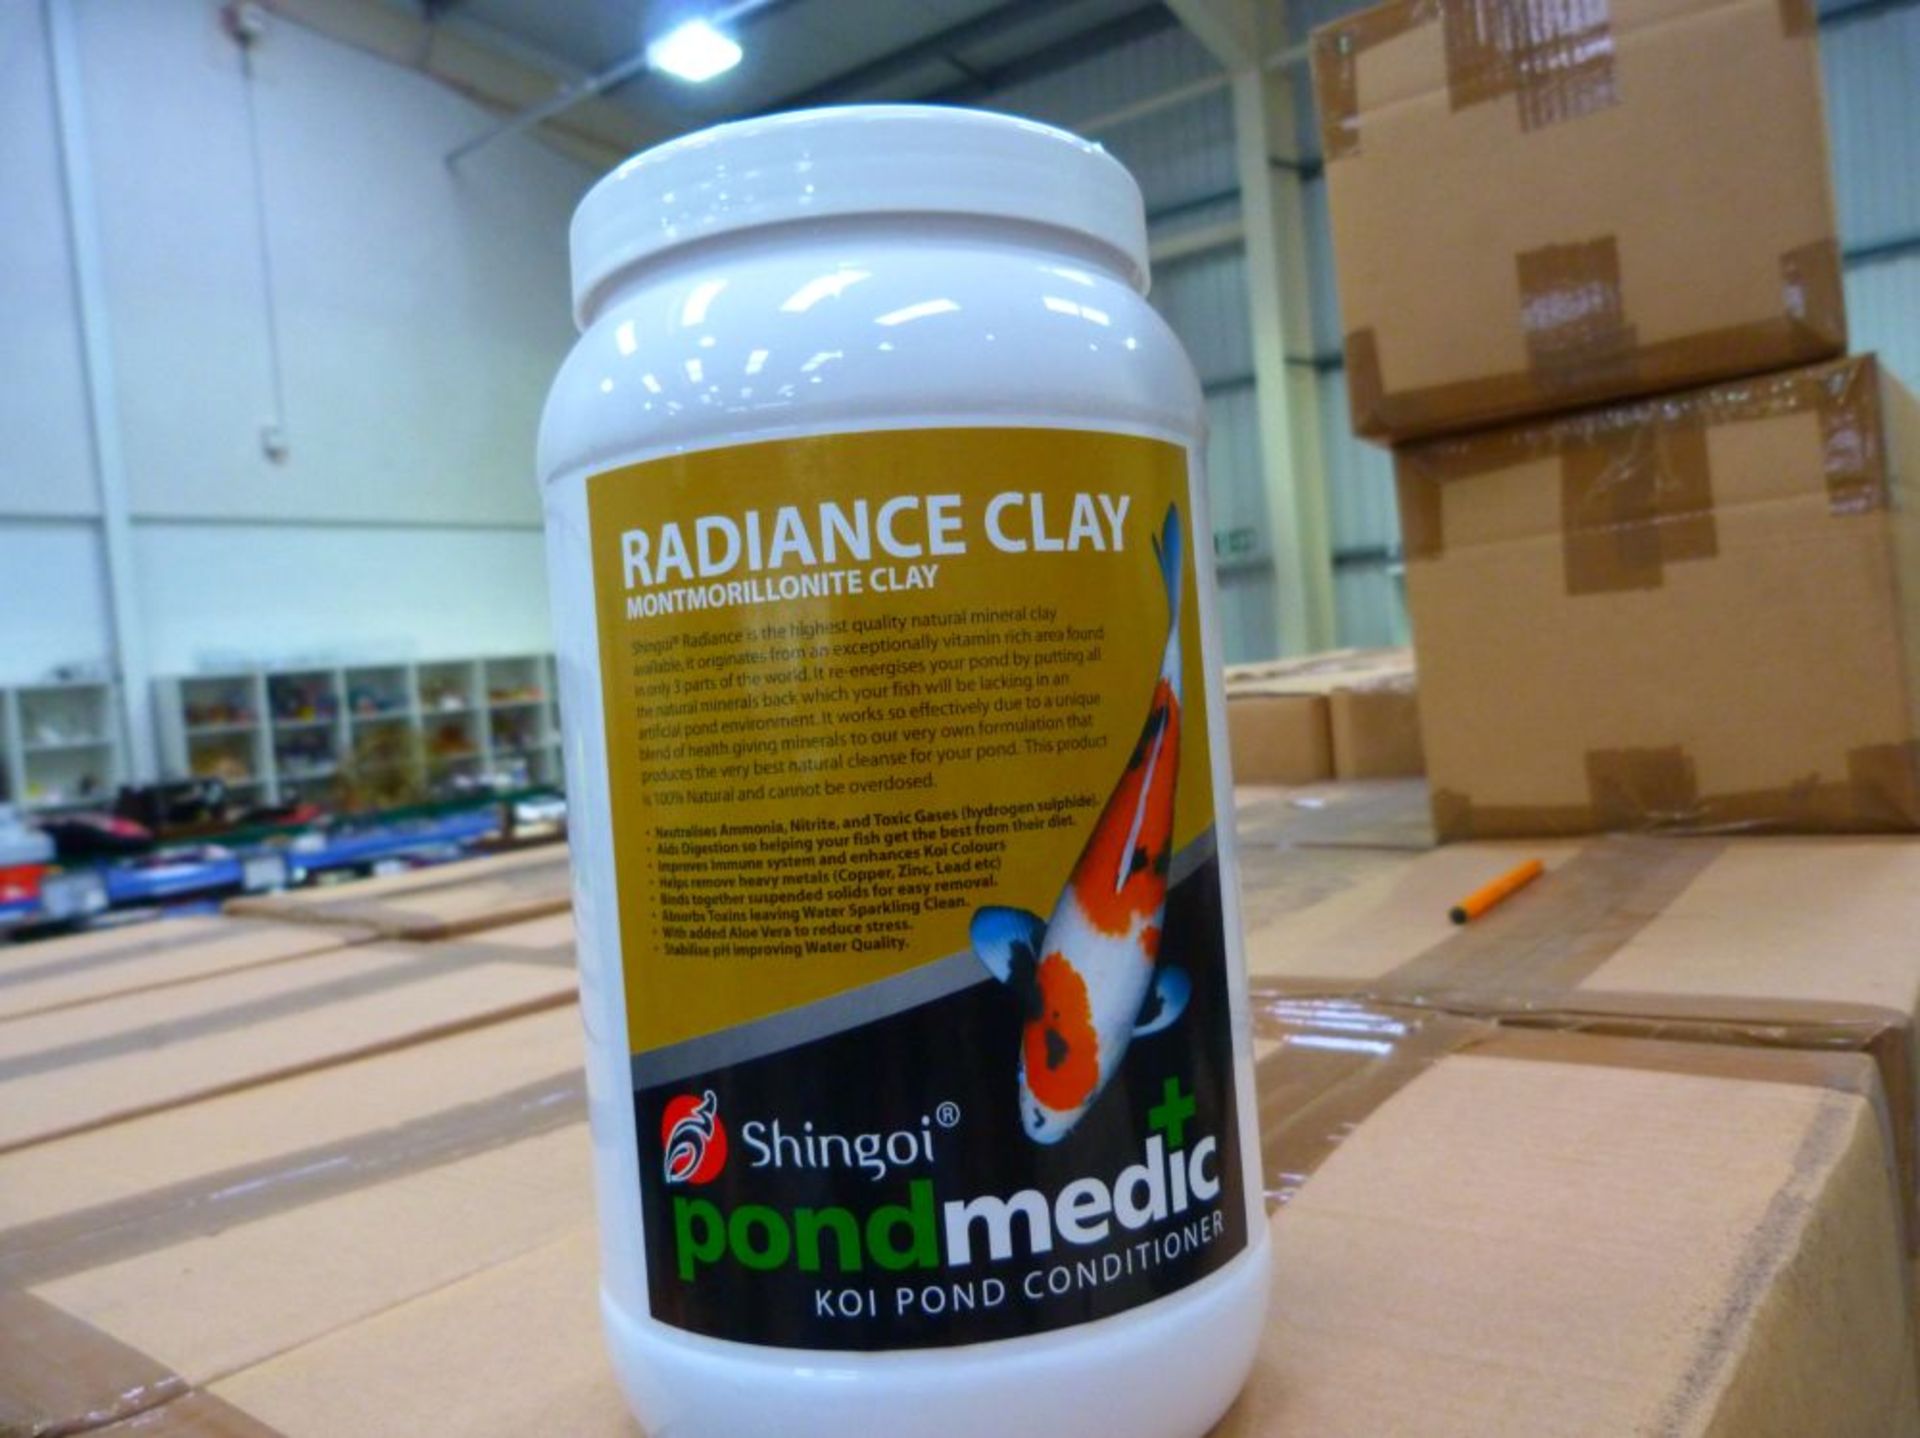 * 2 x Boxes (12 pieces) Radiance Clay Koi Pond Conditioner with Montmorillonite Clay 1.5 Litres per